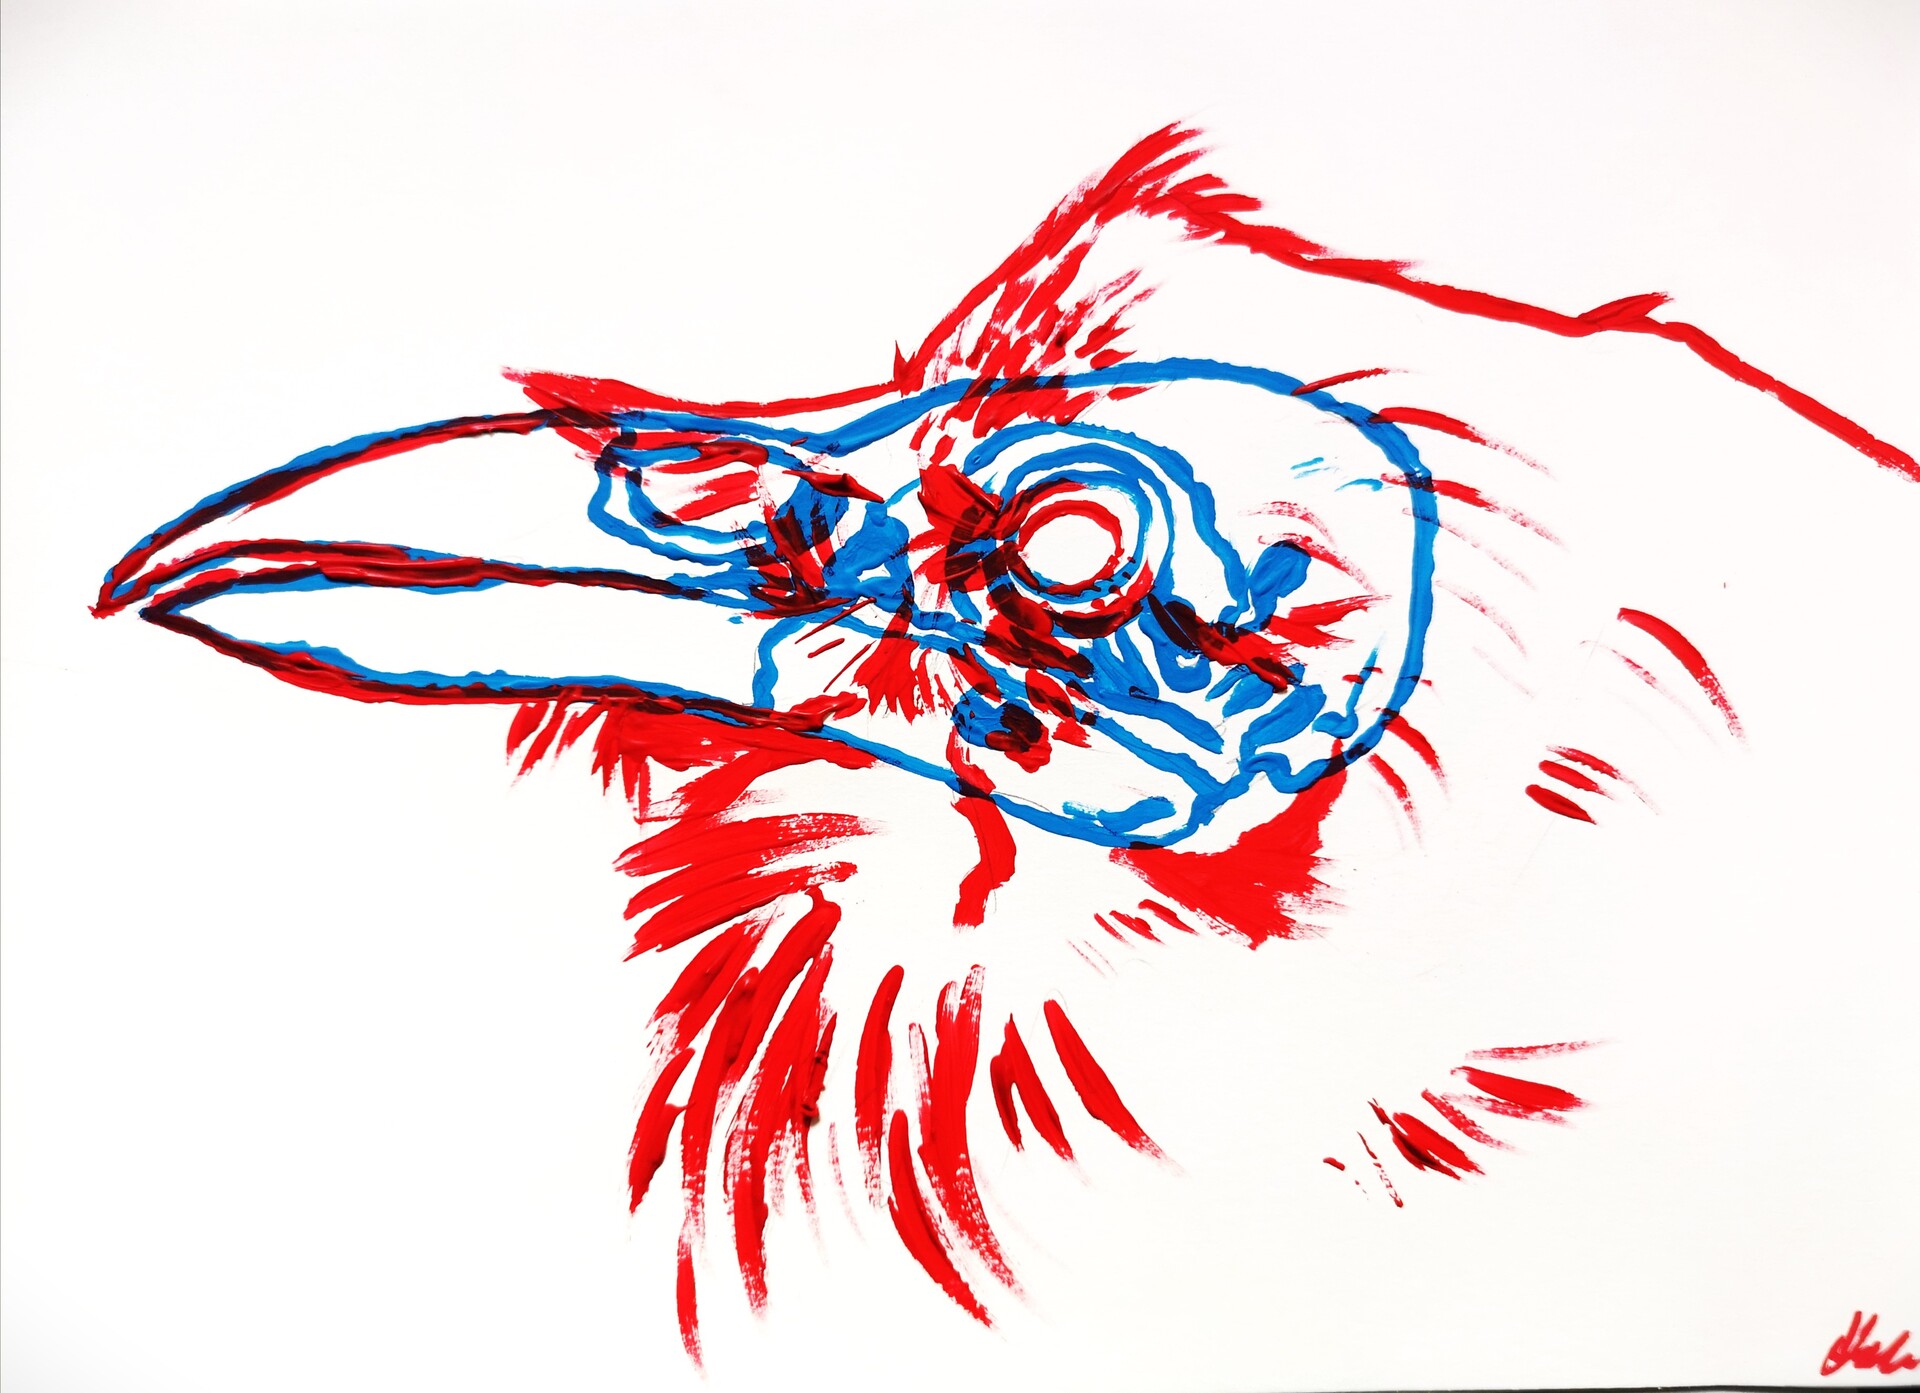 Why do artists sketch in blue and red? - Quora